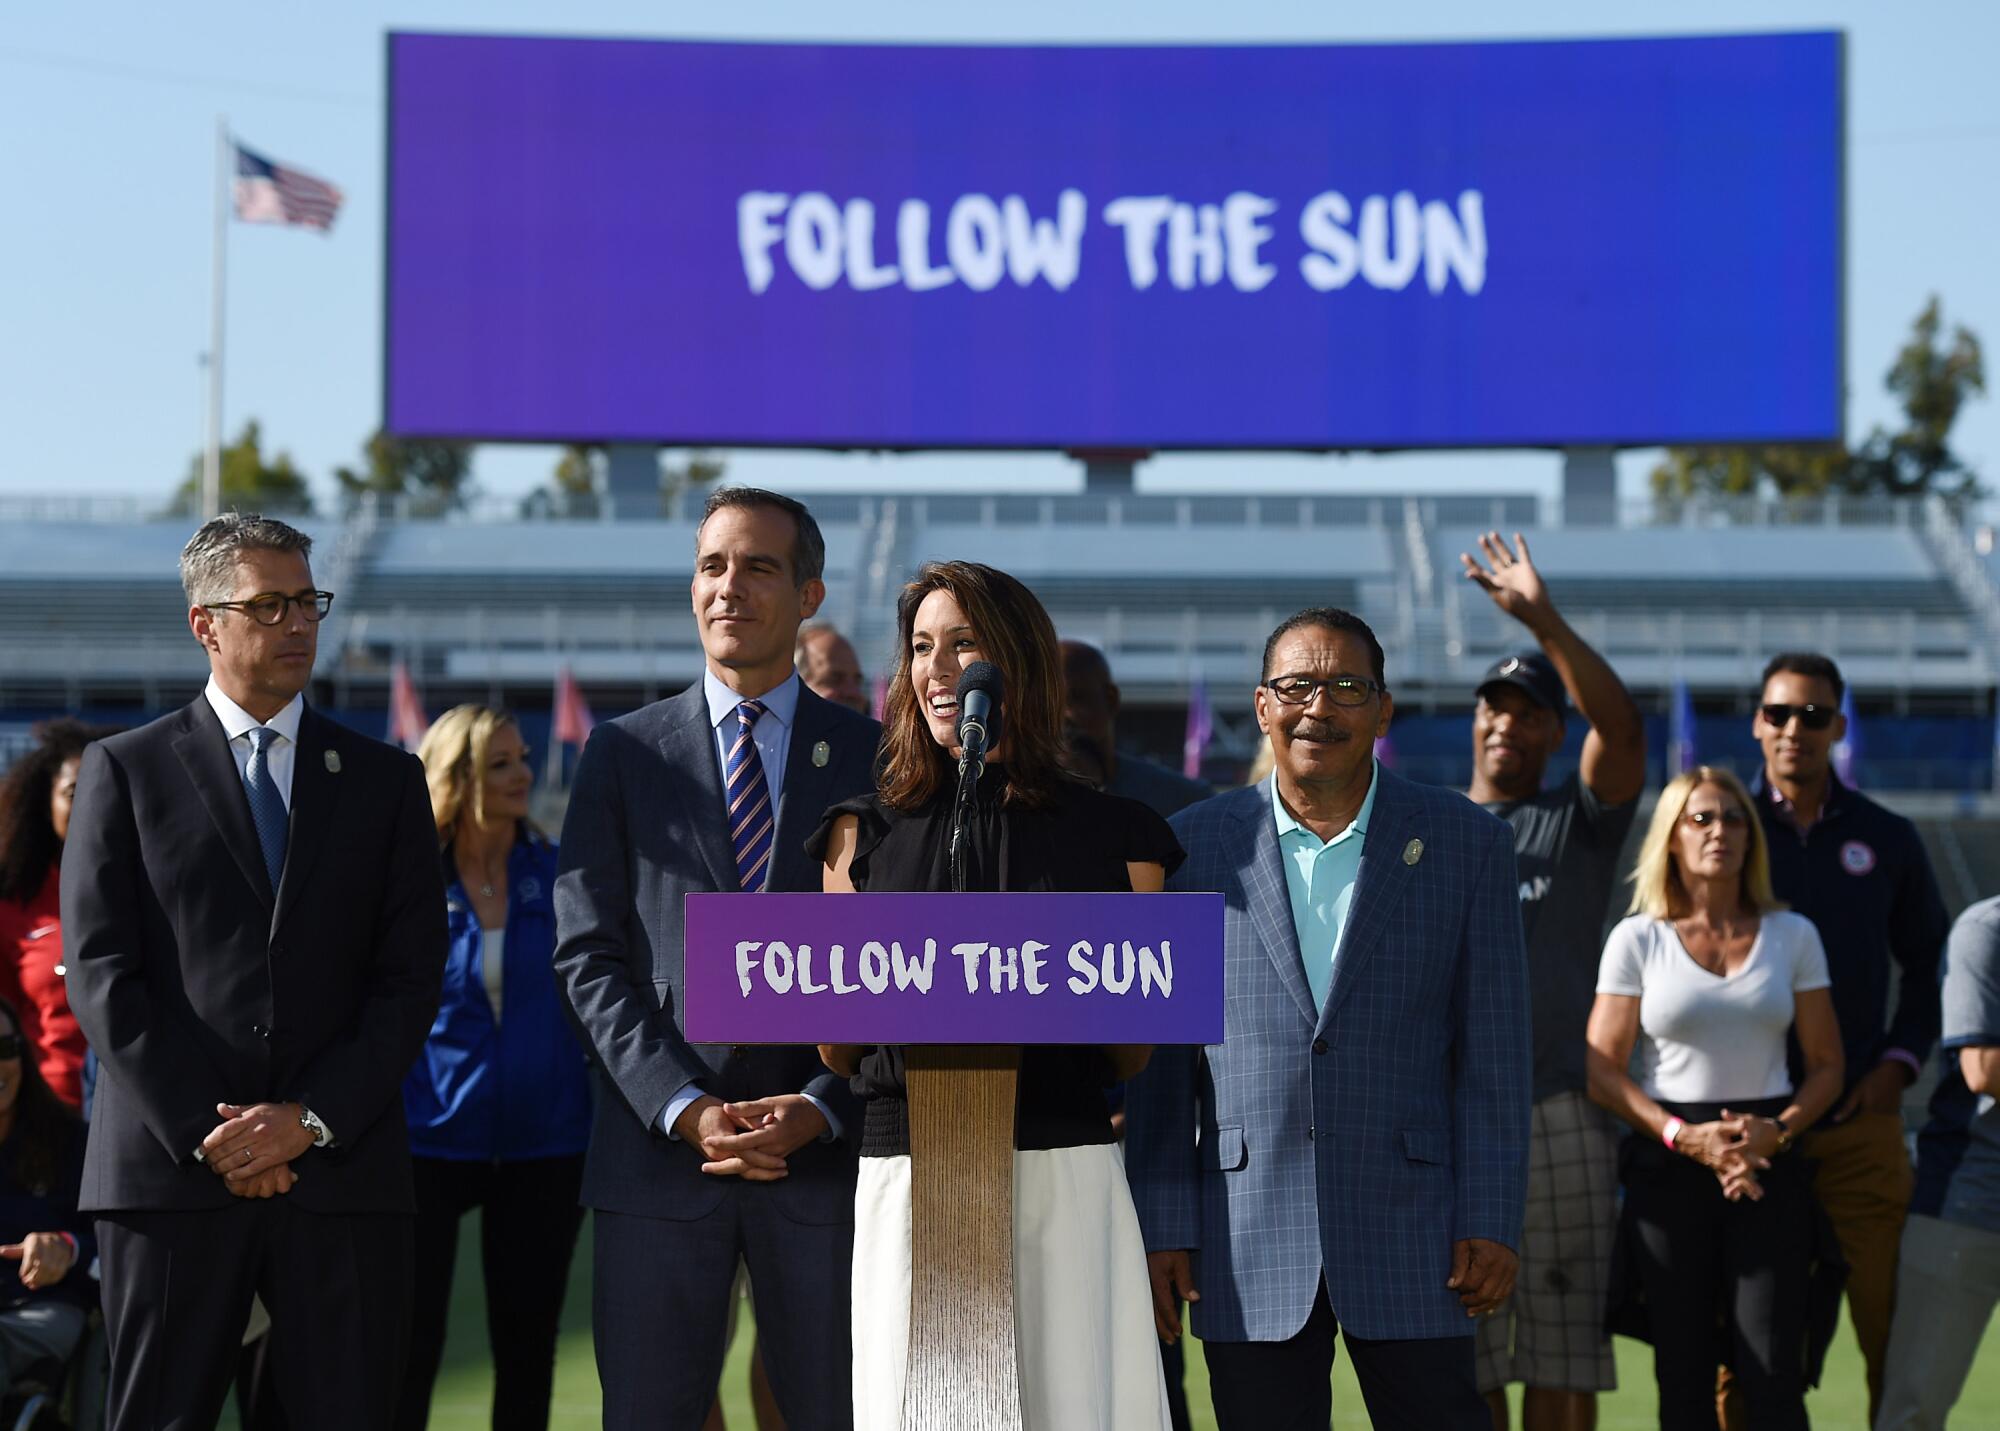 Janet Evans was on hand with Casey Wasserman, left, Los Angeles Mayor Eric Garcetti and City Council President Herb Wesson announcing that L.A. would host the 2028 Summer Olympics.